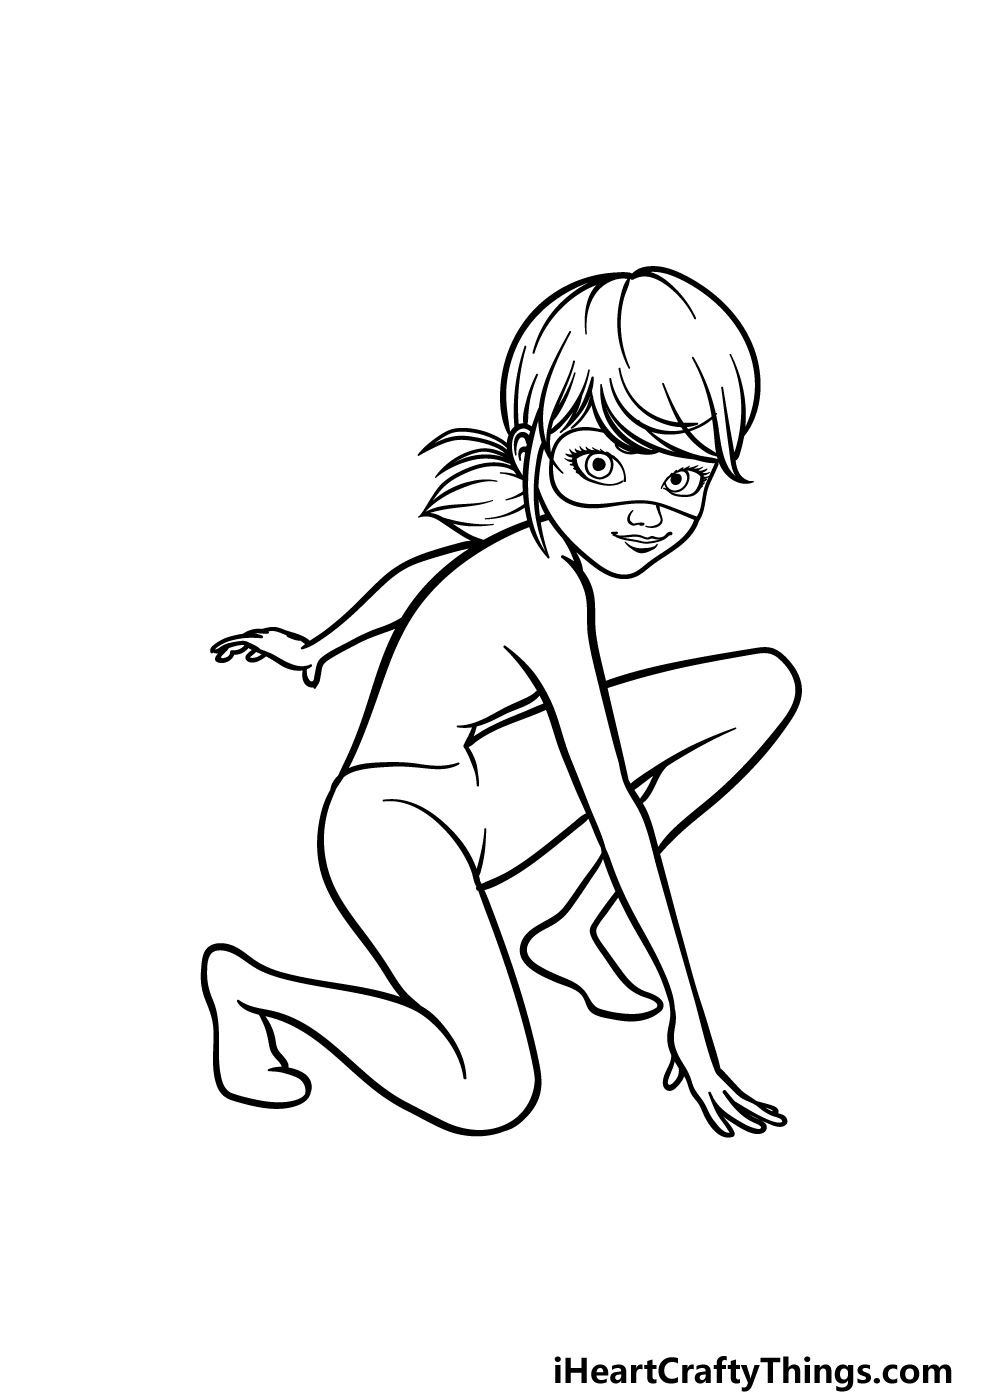 How To Draw Miraculous Ladybug Full Body striping off